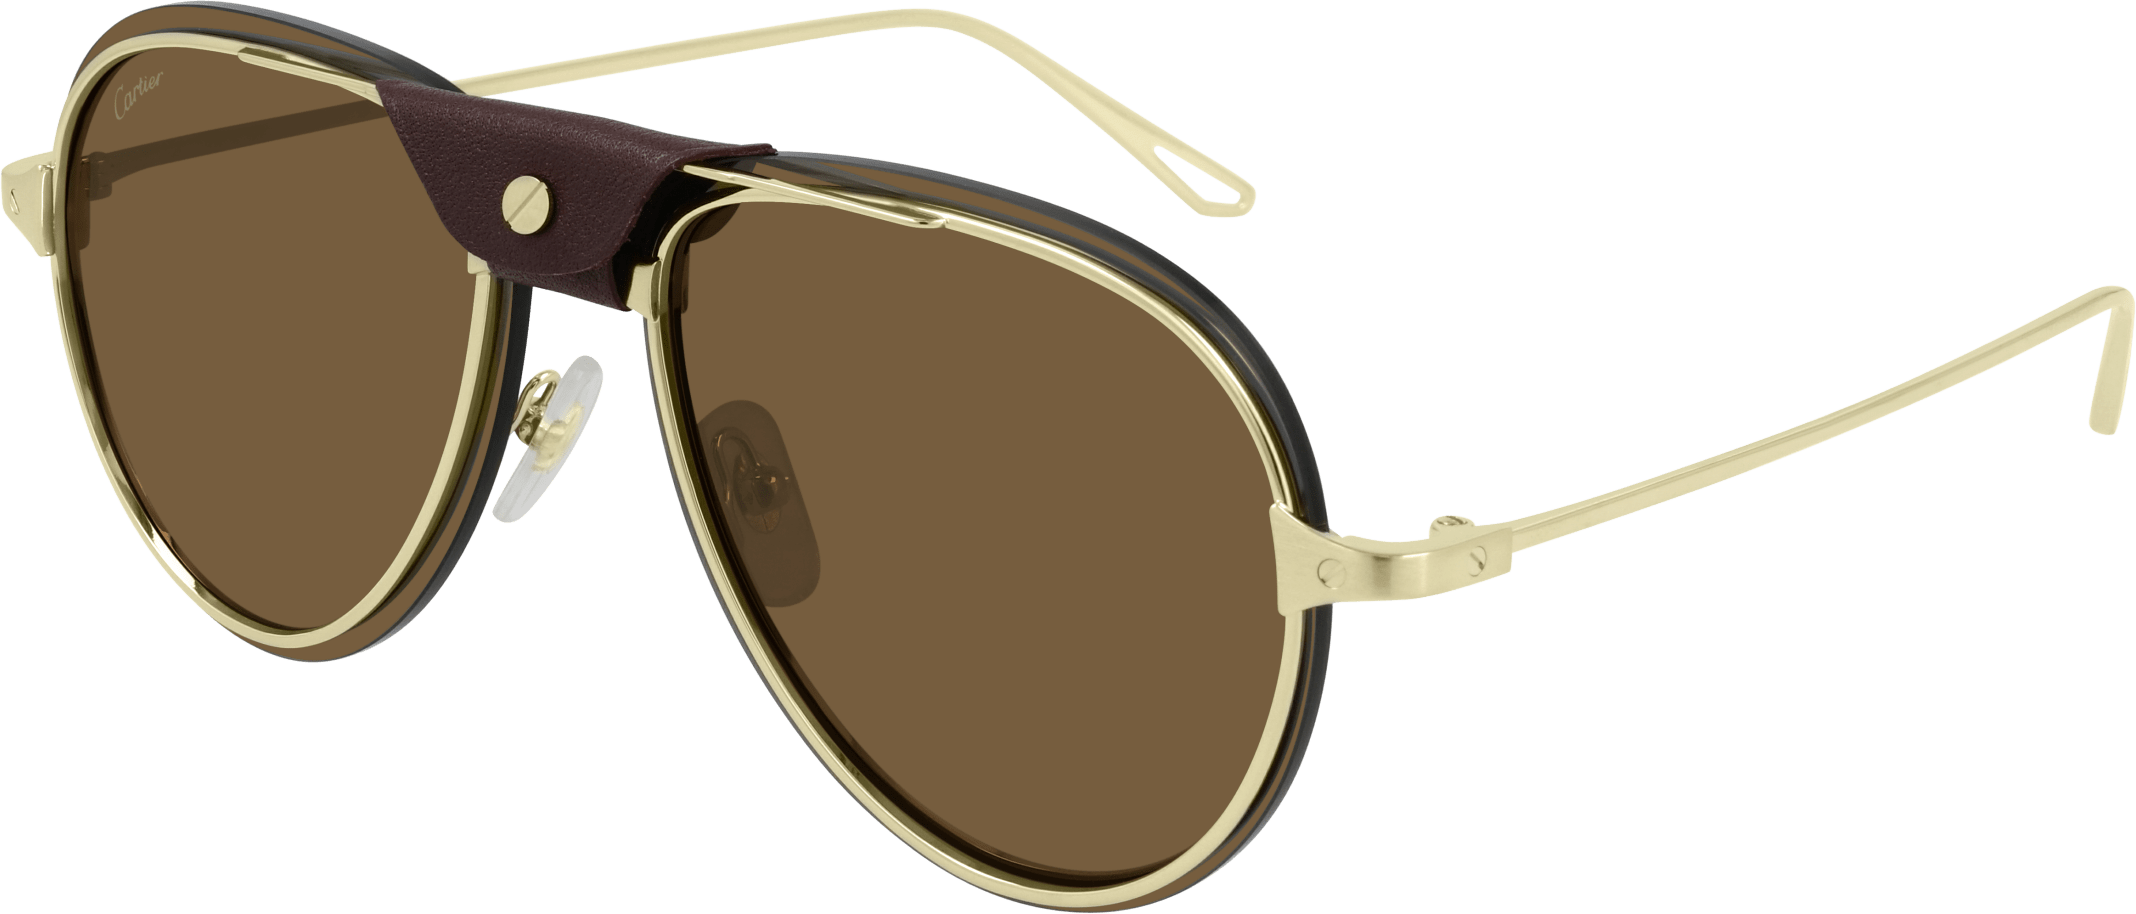 Color_CT0242S-004 - GOLD - BROWN - AR (ANTI REFLECTIVE) - POLARIZED